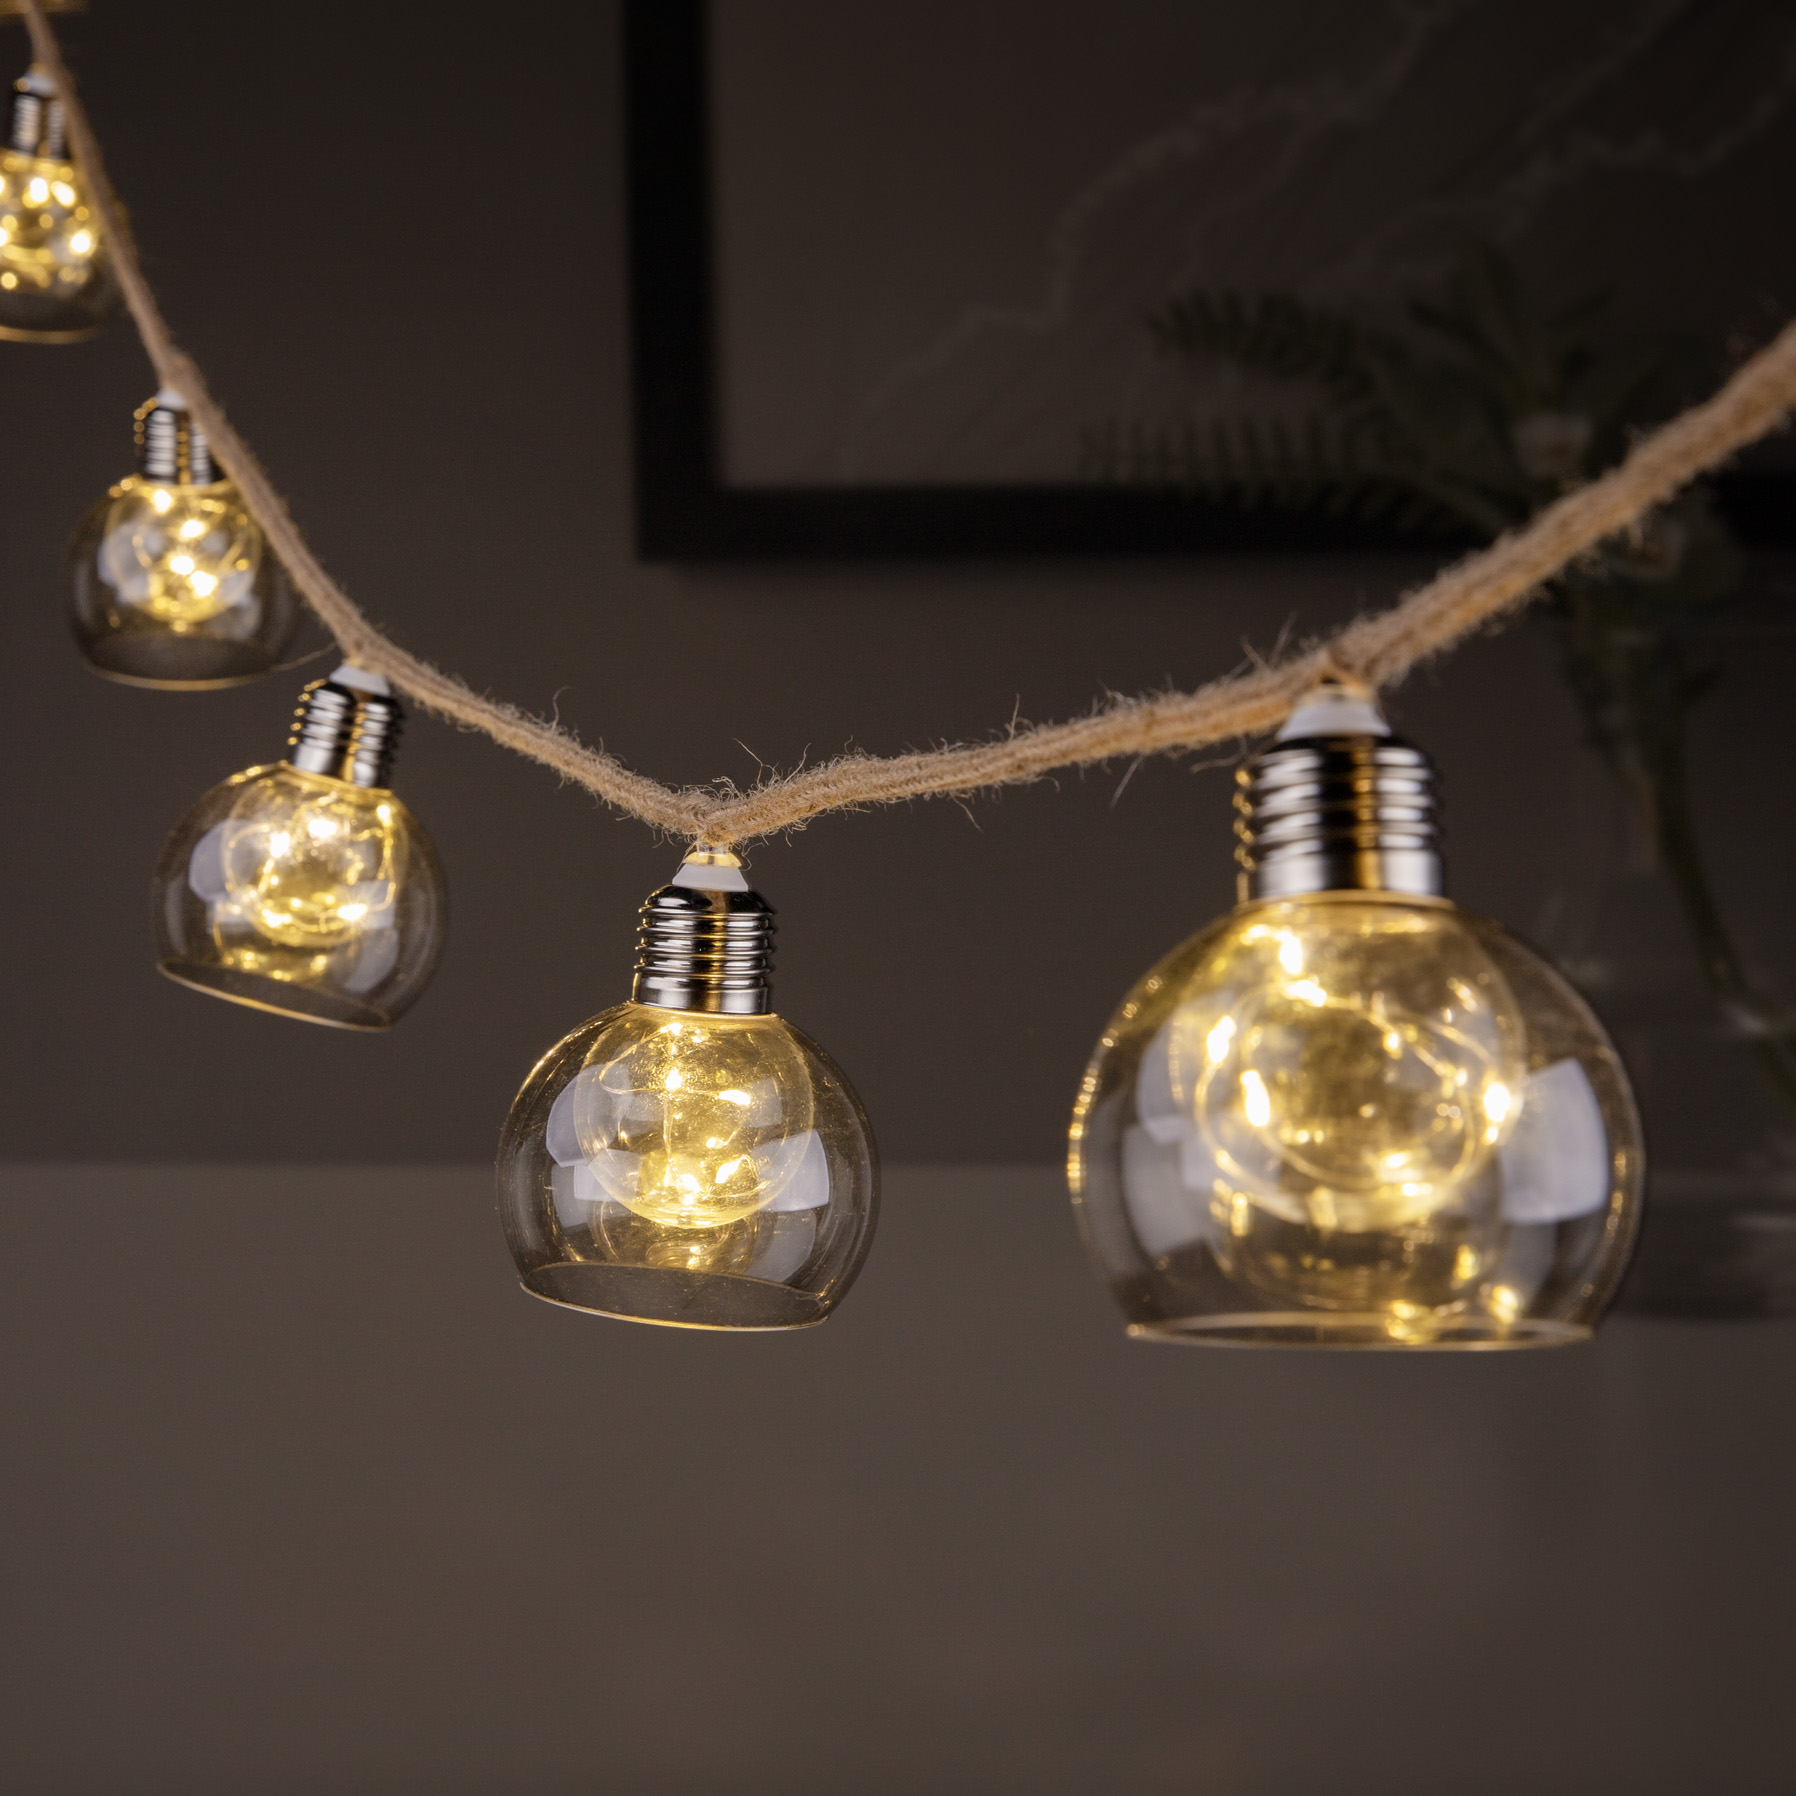 Solar Powered String Lights With Smoky Grey Bulbs Decorative Outdoor | ZHONGXIN Featured Image